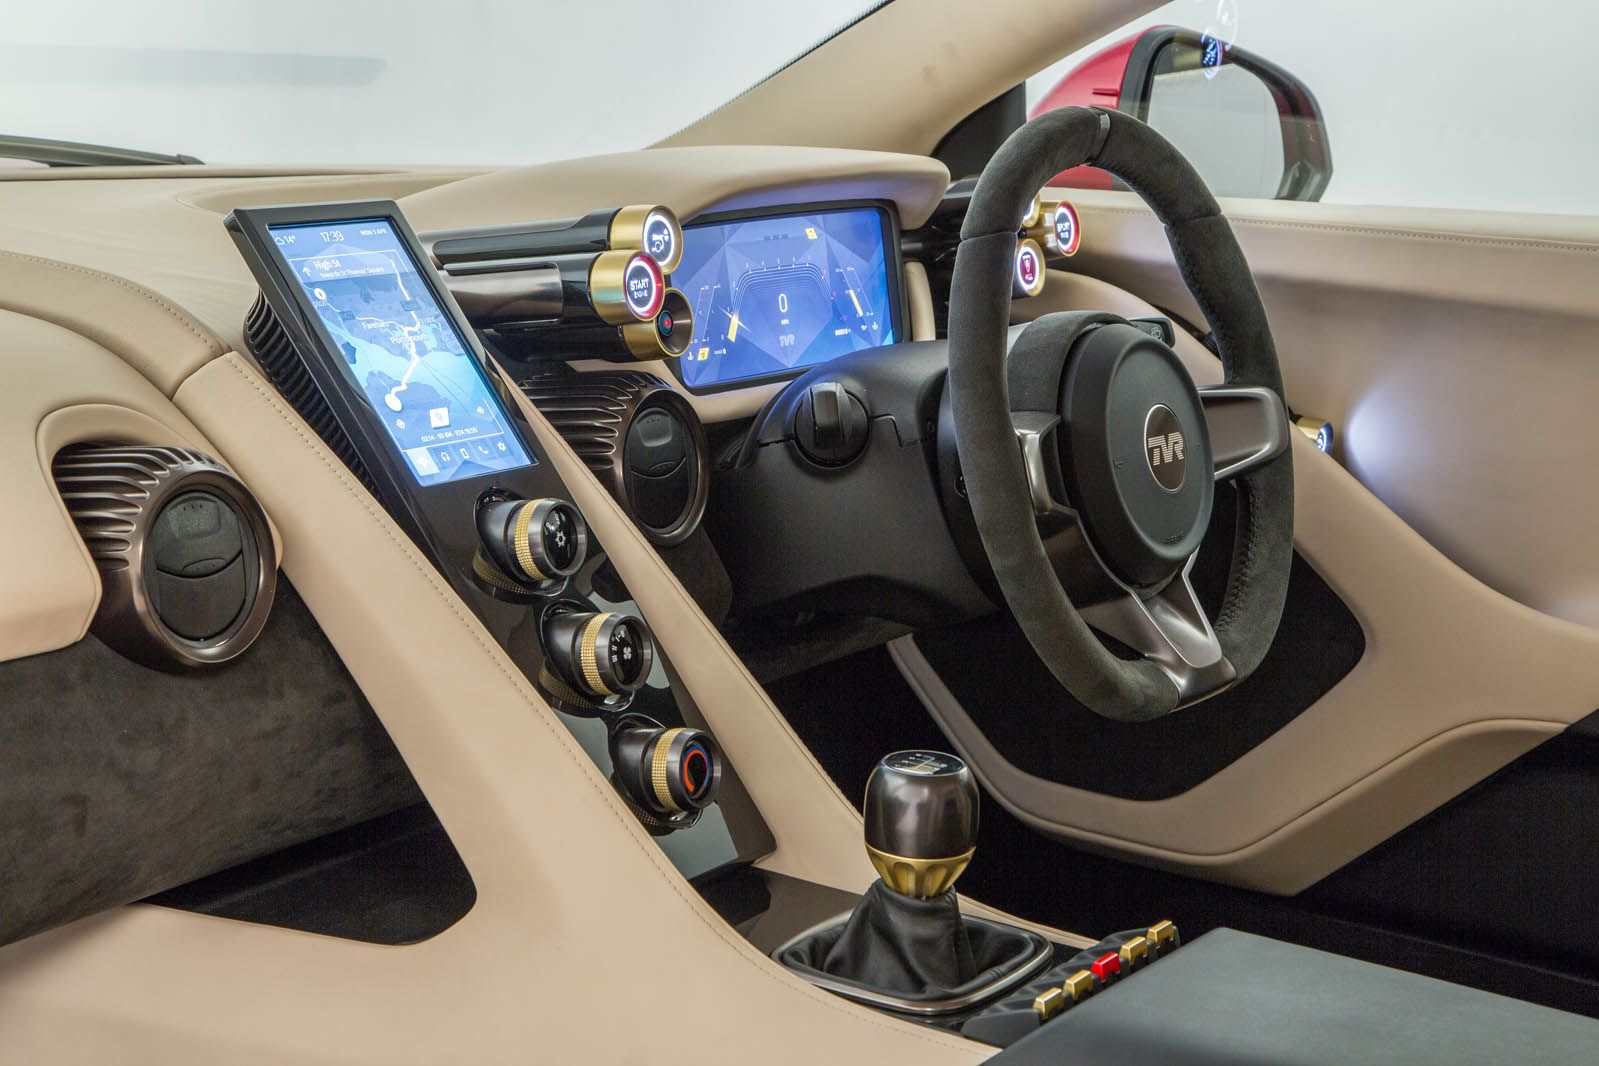 An Image Of The 2022 TVR Griffith's Minimalistic Interior